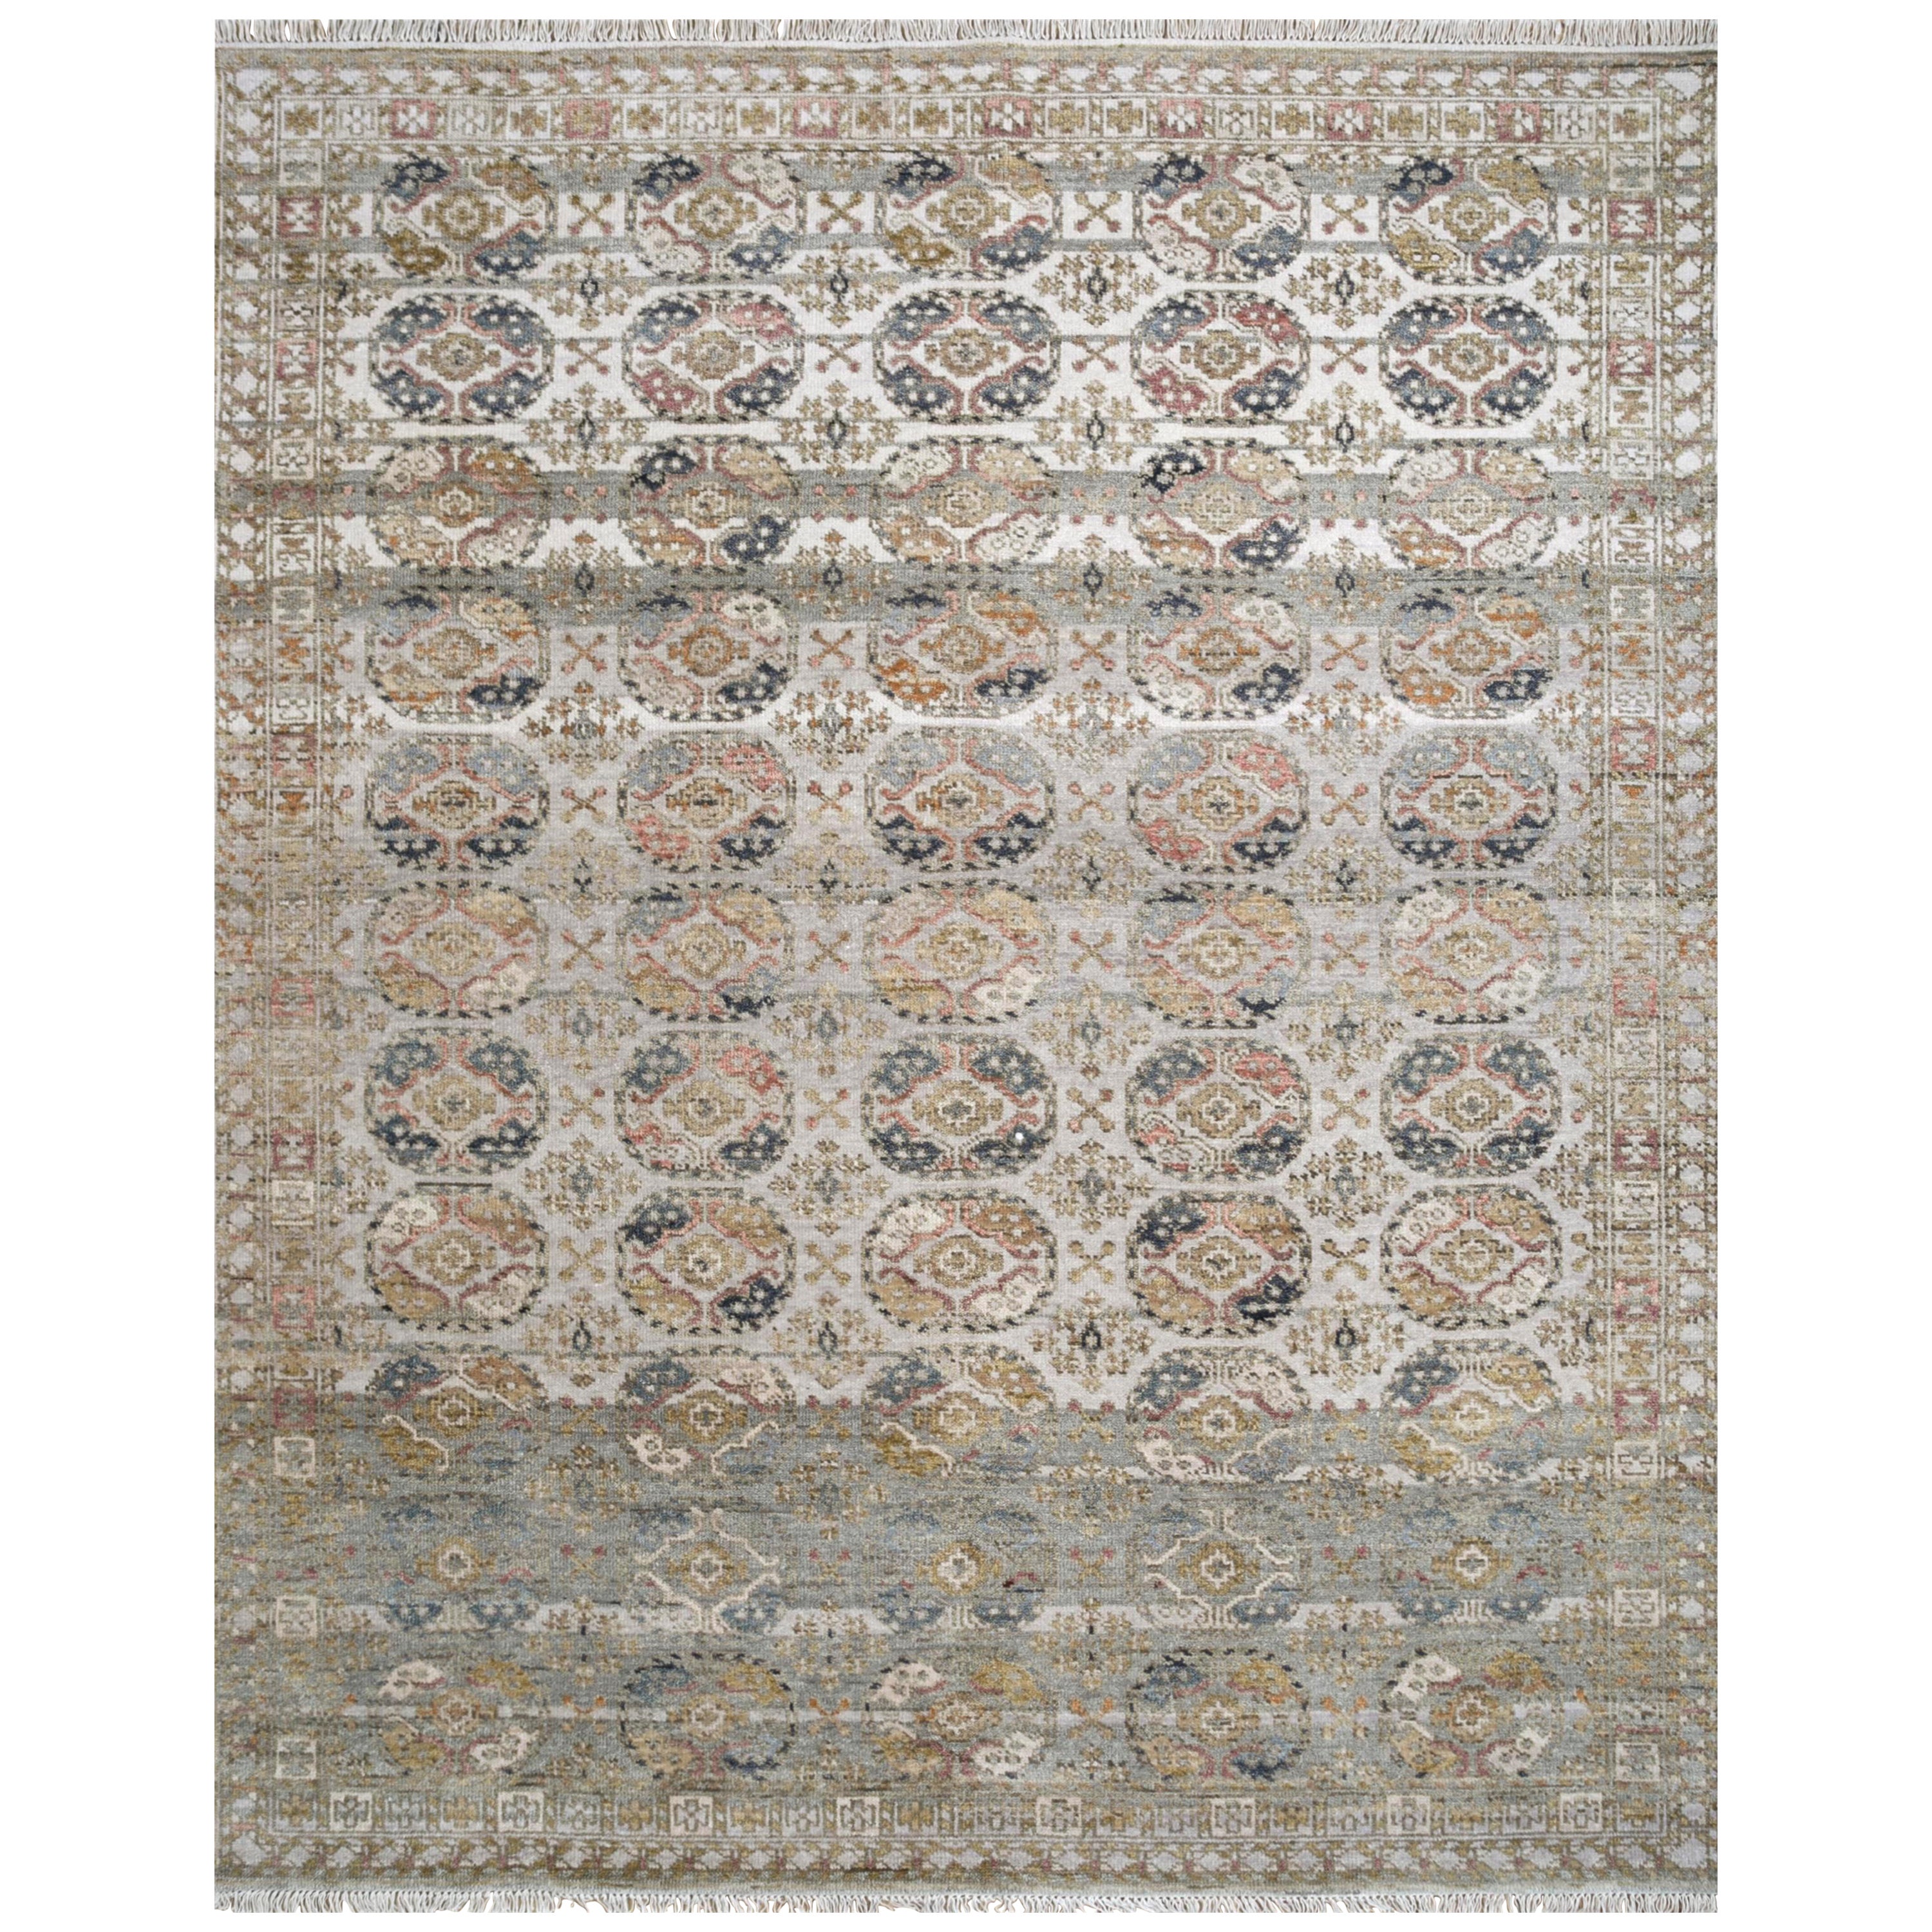 Ornate Odyssey Dark Ivory & Clay 240X300 cm Handknotted Rug For Sale